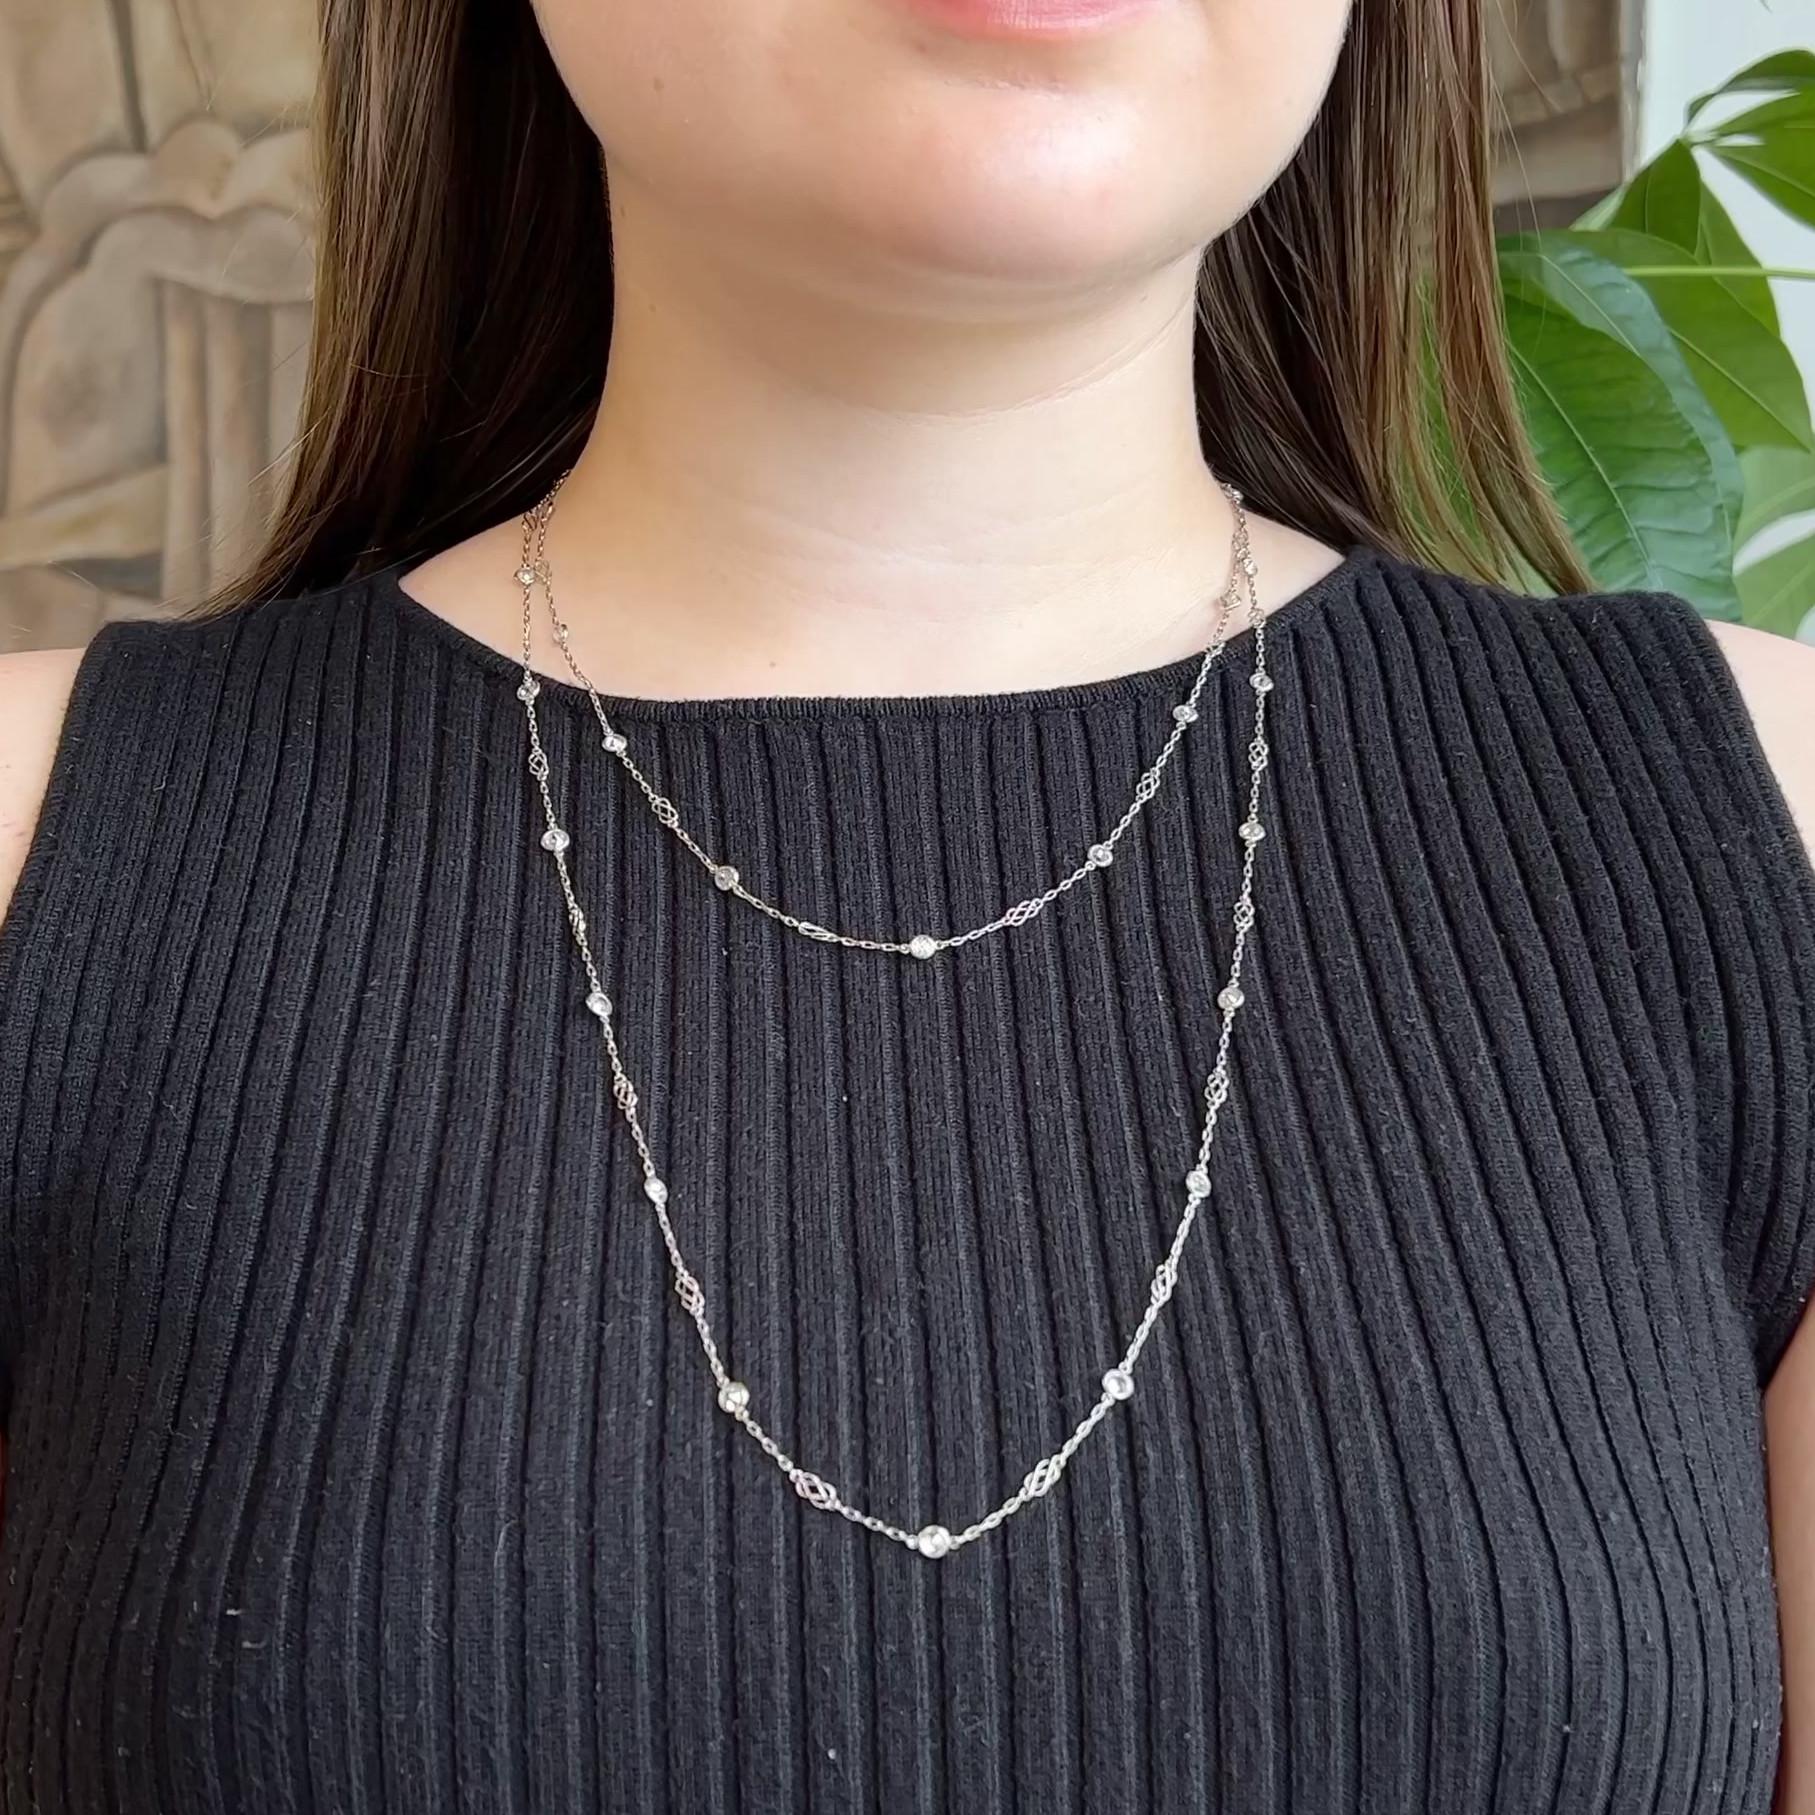 One 4.89 Carats Old European Cut Diamonds By The Yard Platinum Necklace. Featuring 31 old European cut diamonds with a total weight of 4.89 carats, graded near-colorless, VS-SI clarity. Crafted in platinum with purity marks. Circa 2022. The necklace